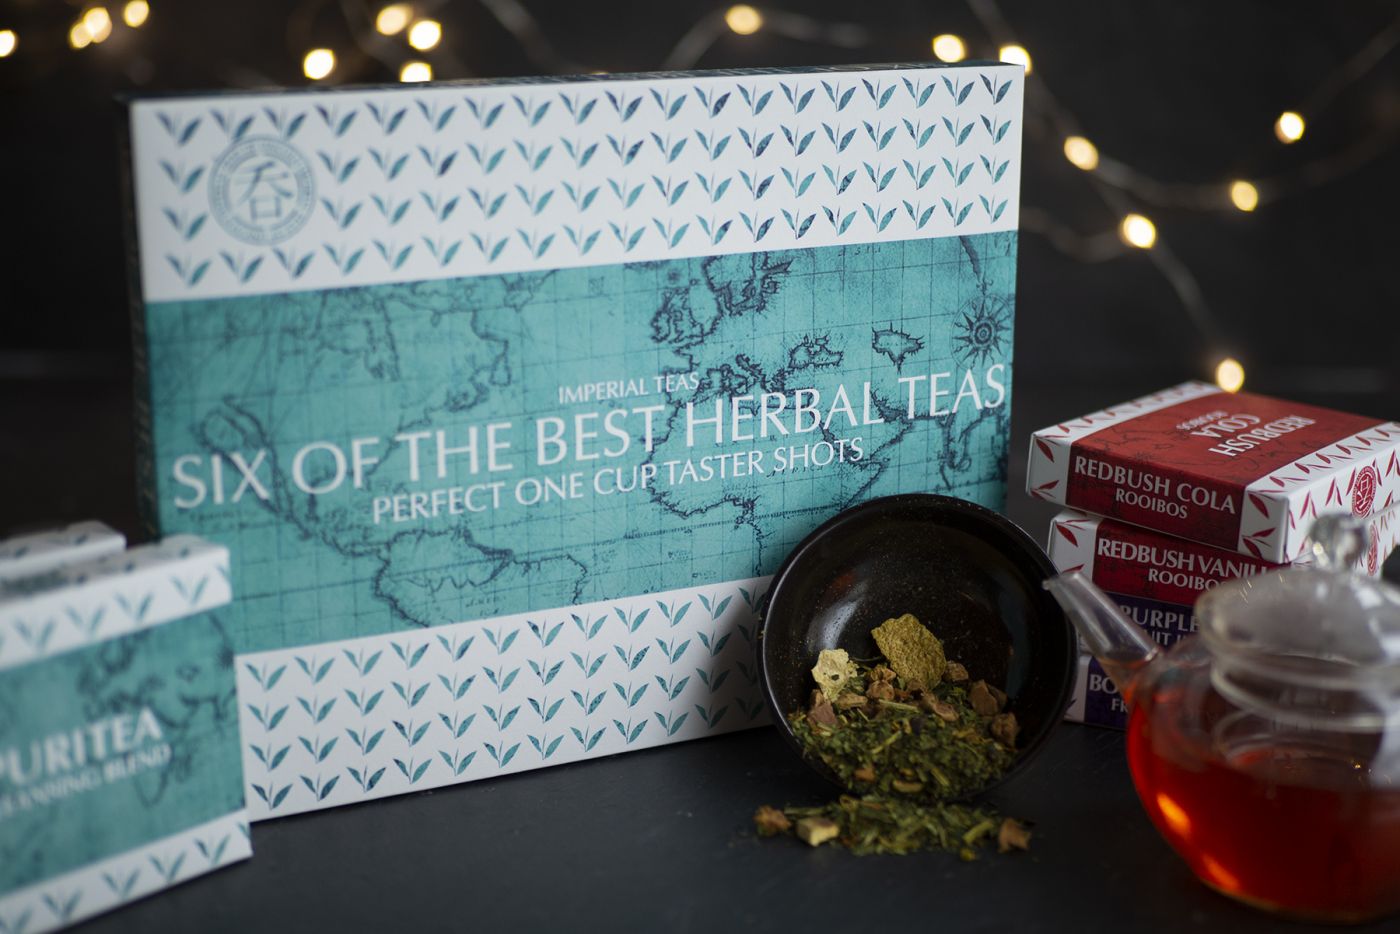 Six of the Best Herbal Teas Selection Pack